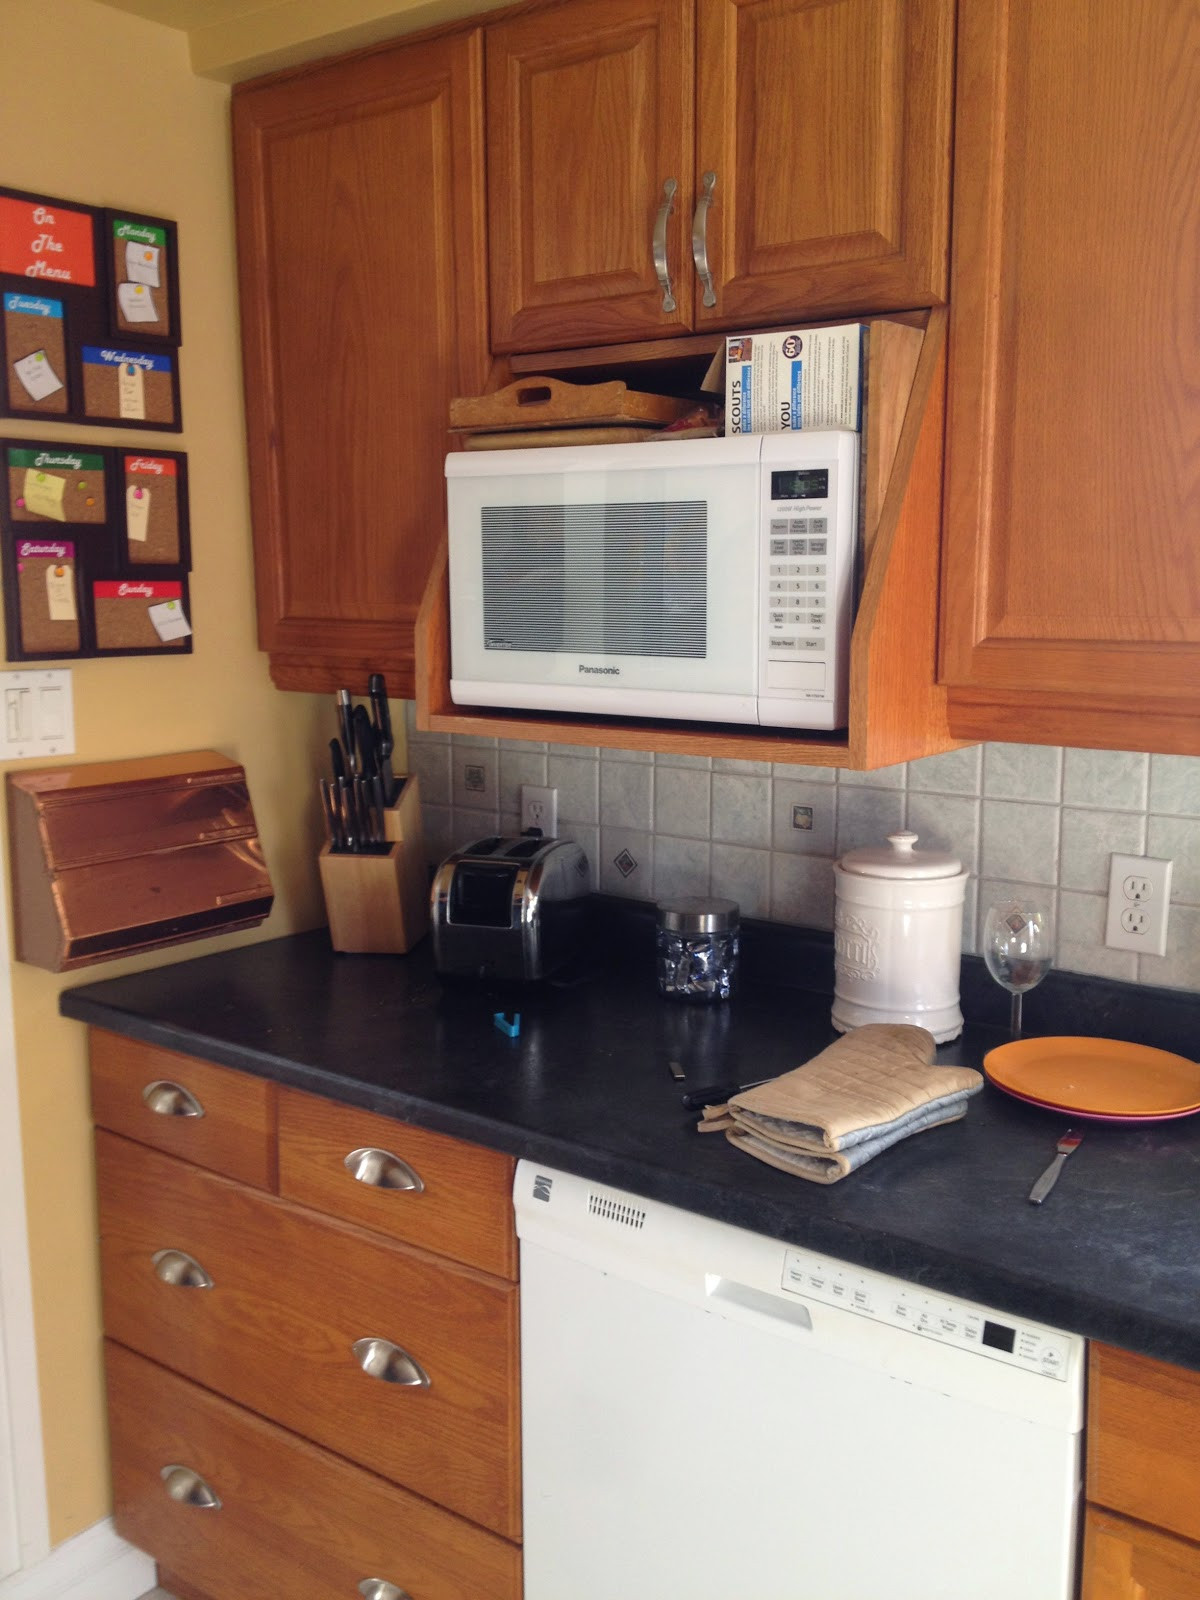 Kitchen Cabinet With Microwave Shelf
 Hack Your Kitchen for an Over the Range Microwave Kitchen